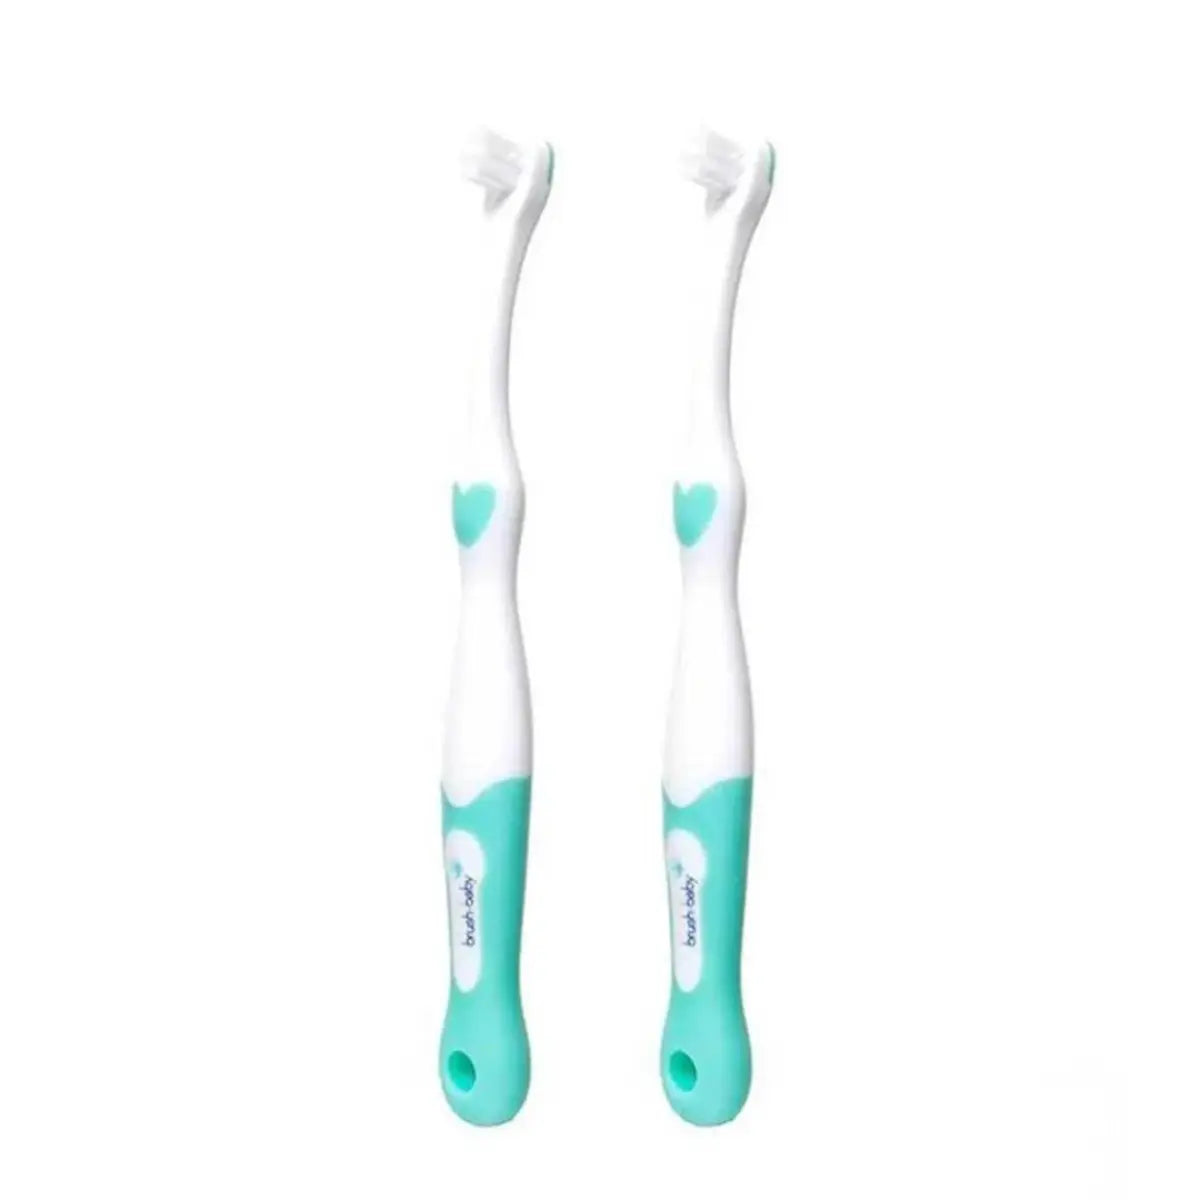 Teal firstbrush first toothbrush for babies and toddlers